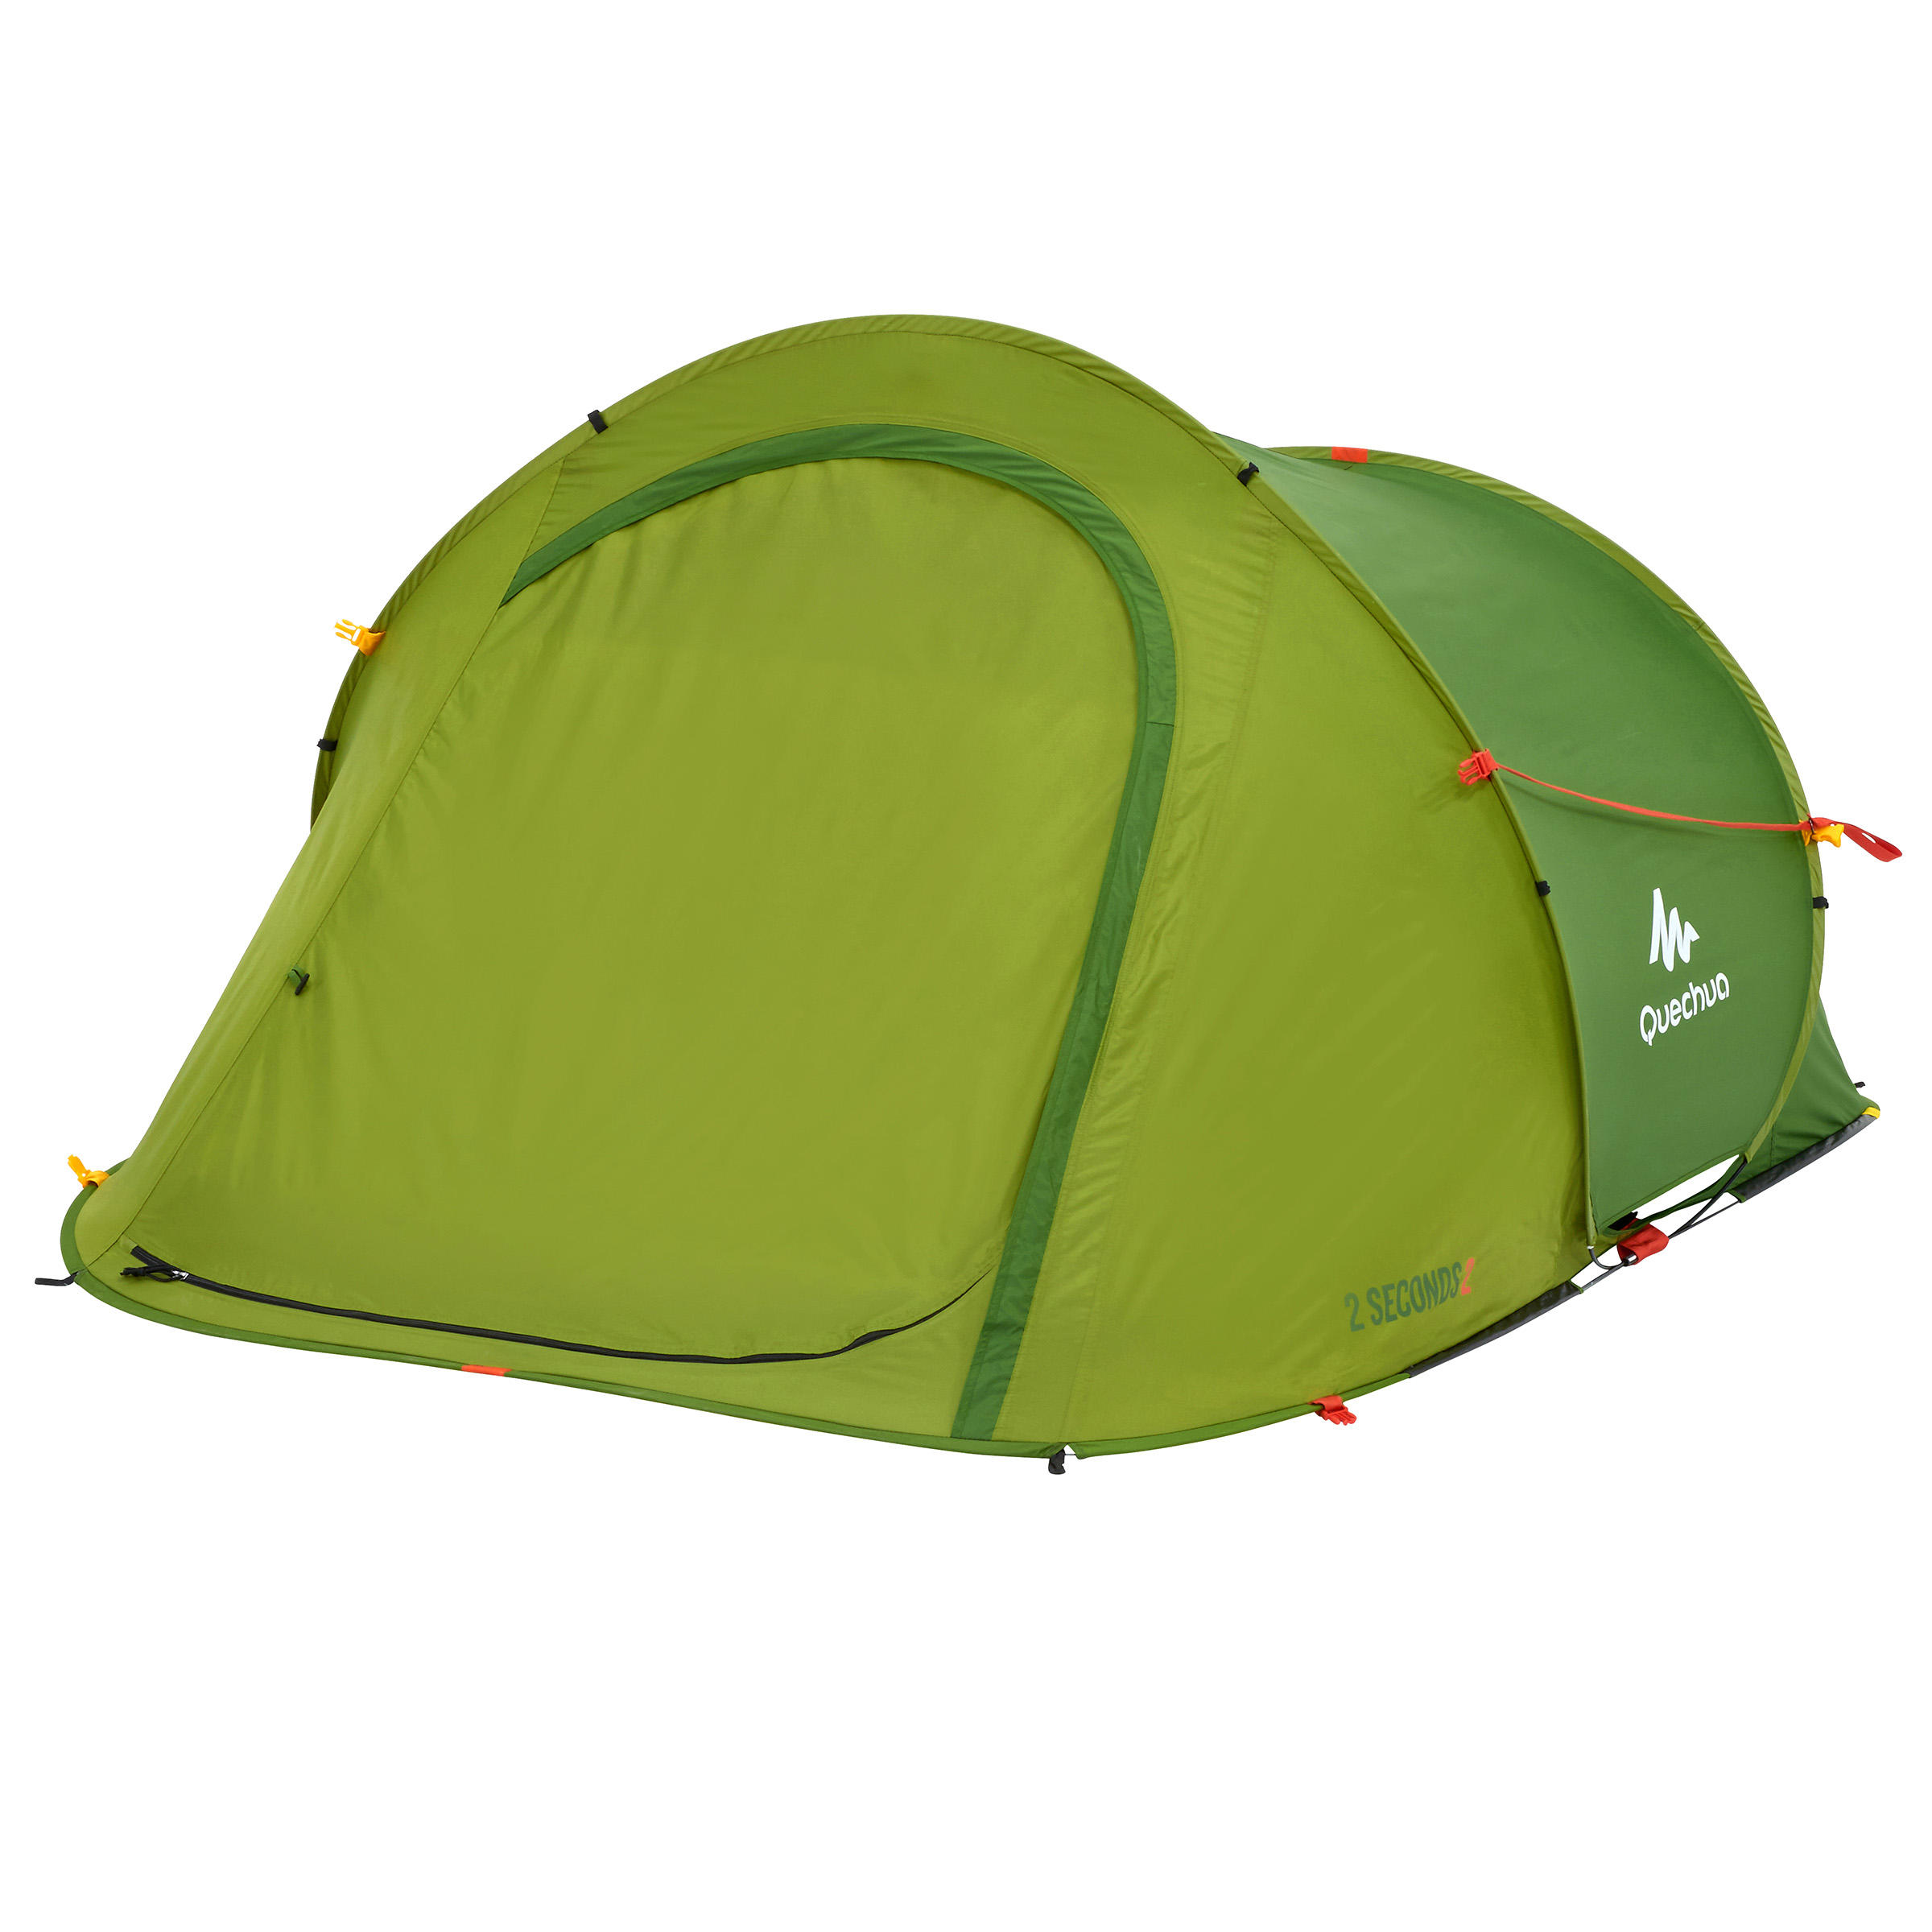 2 SECONDS camping tent | 2 person green 3/17